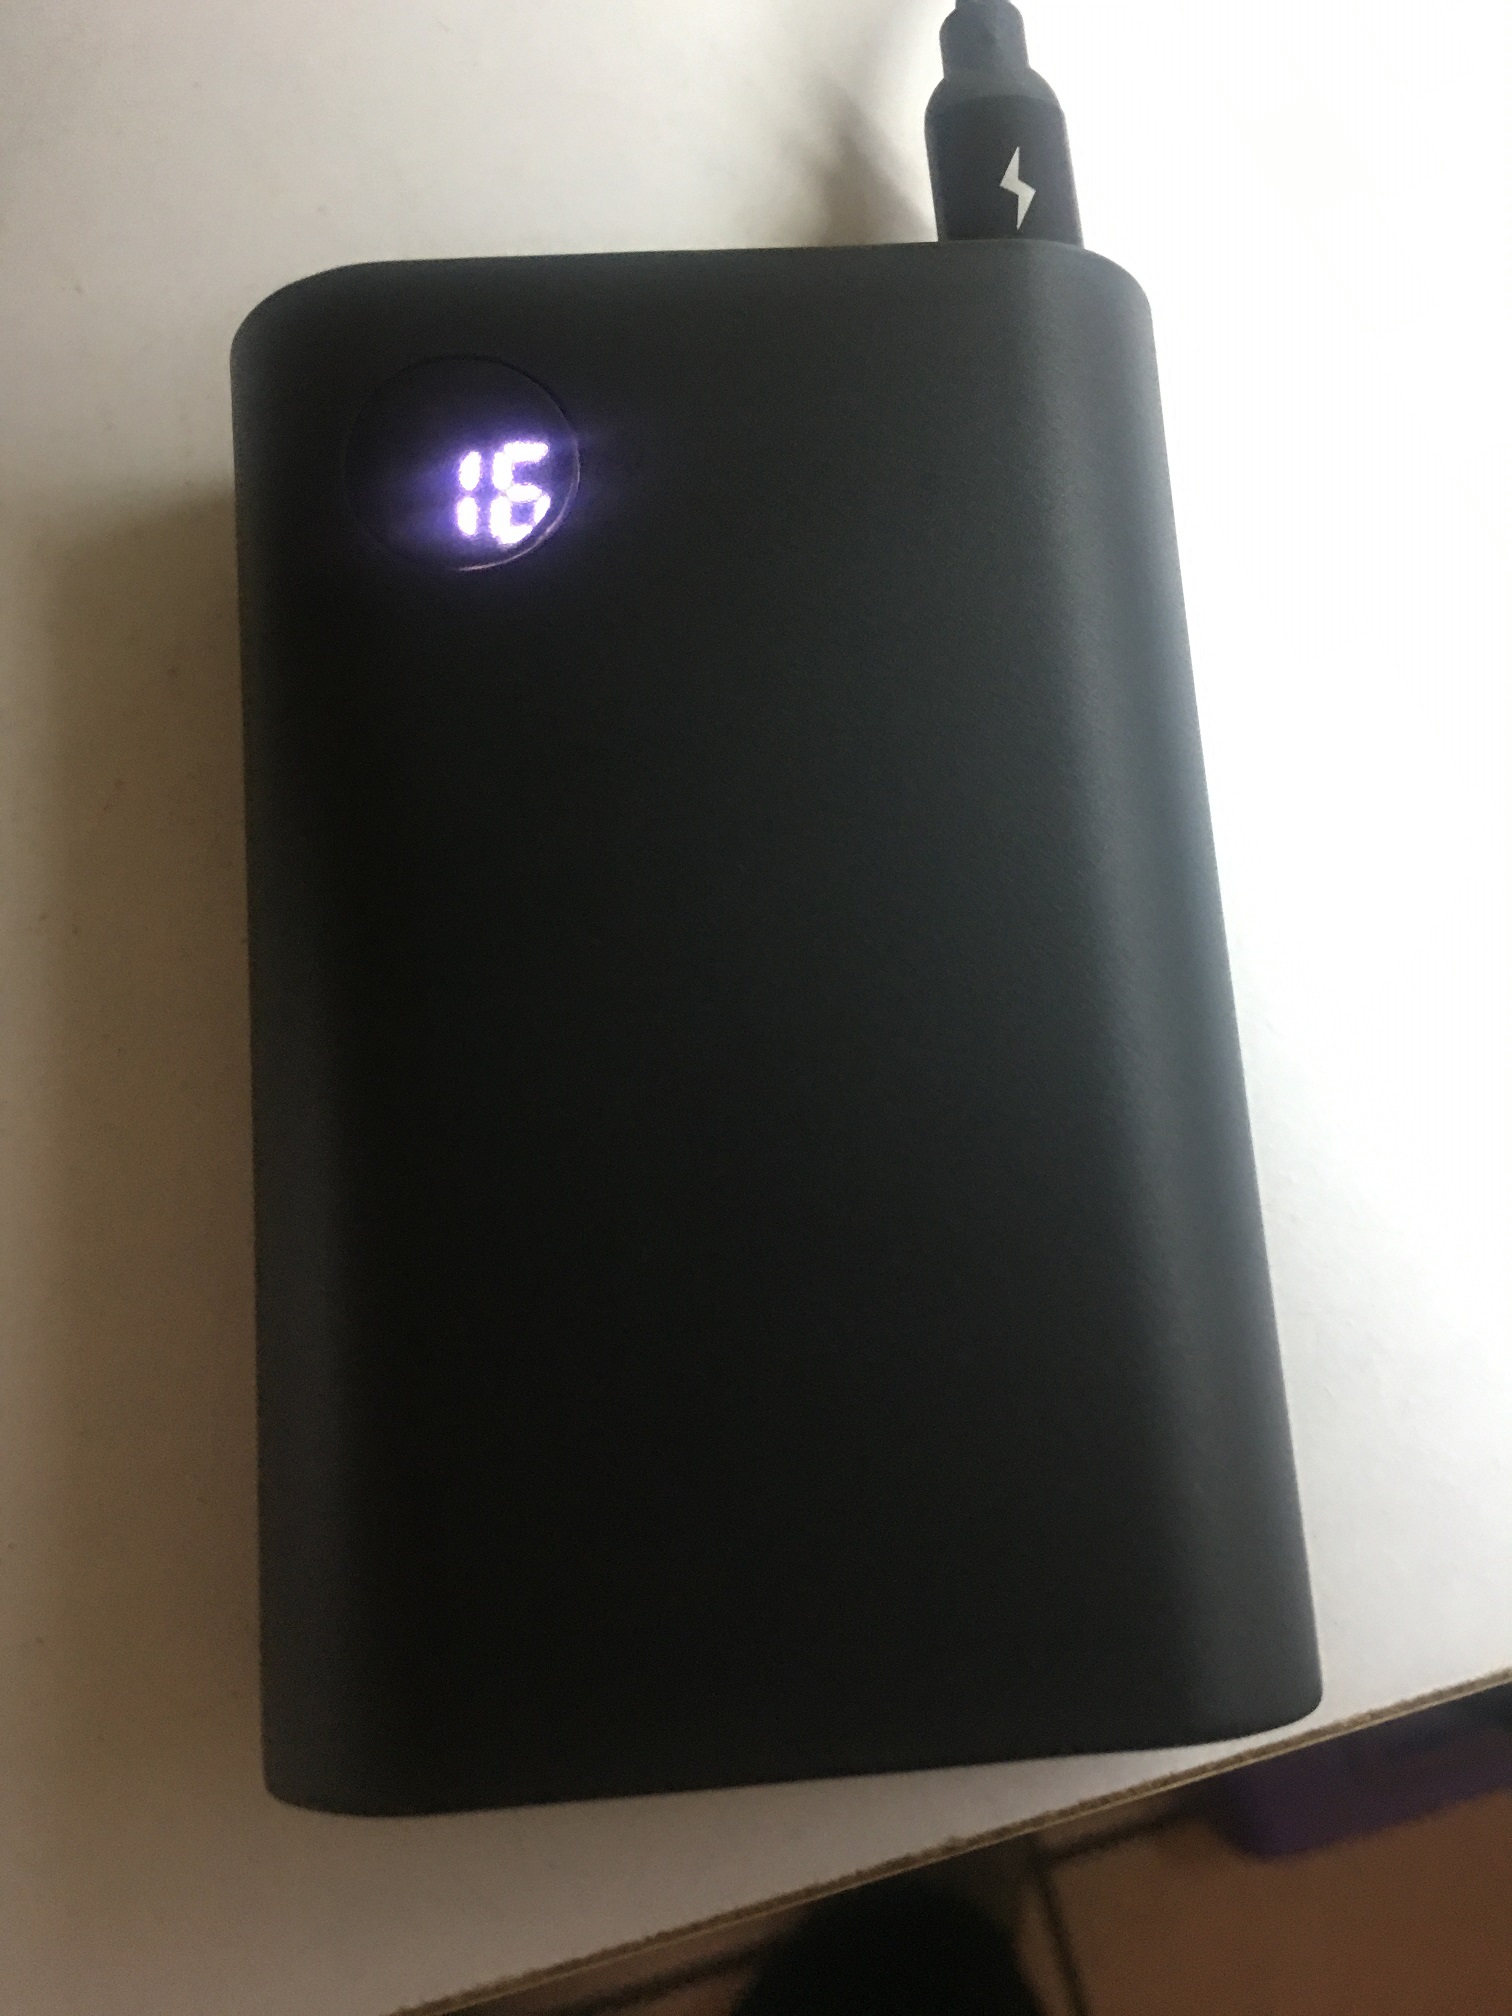 13800 mAh portable power bank by Xooparc